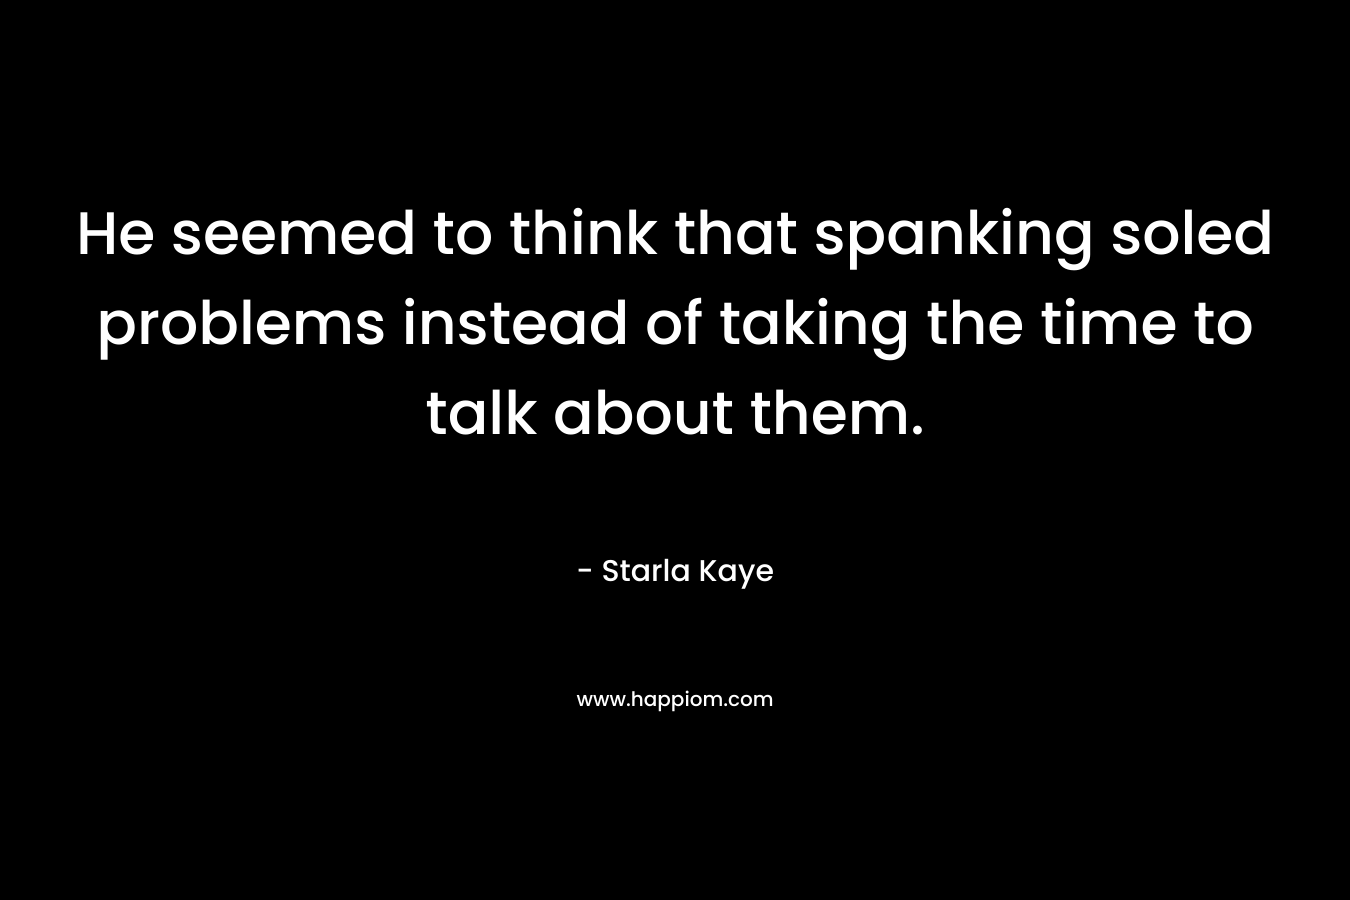 He seemed to think that spanking soled problems instead of taking the time to talk about them. – Starla Kaye